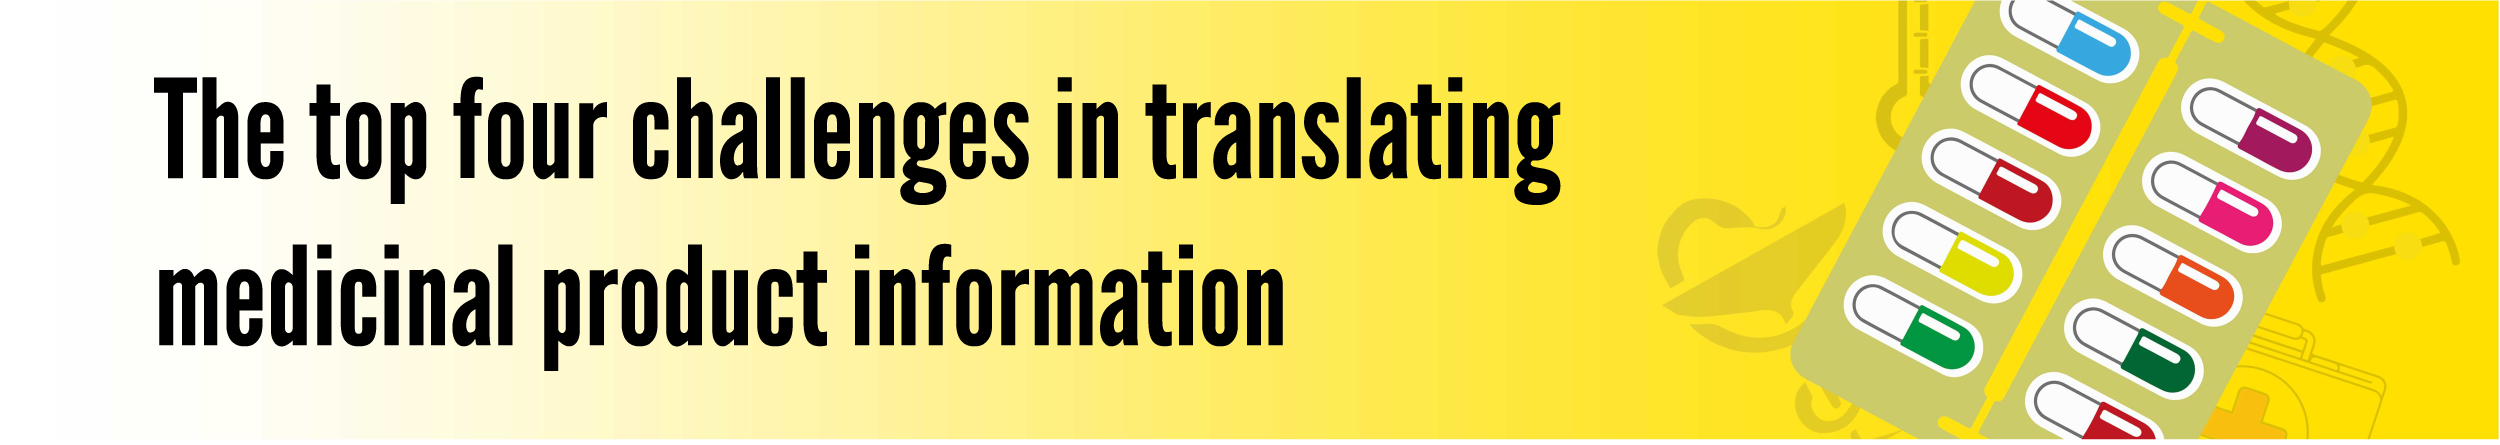 The Top 4 Challenges in Translating Medicinal Product Information 